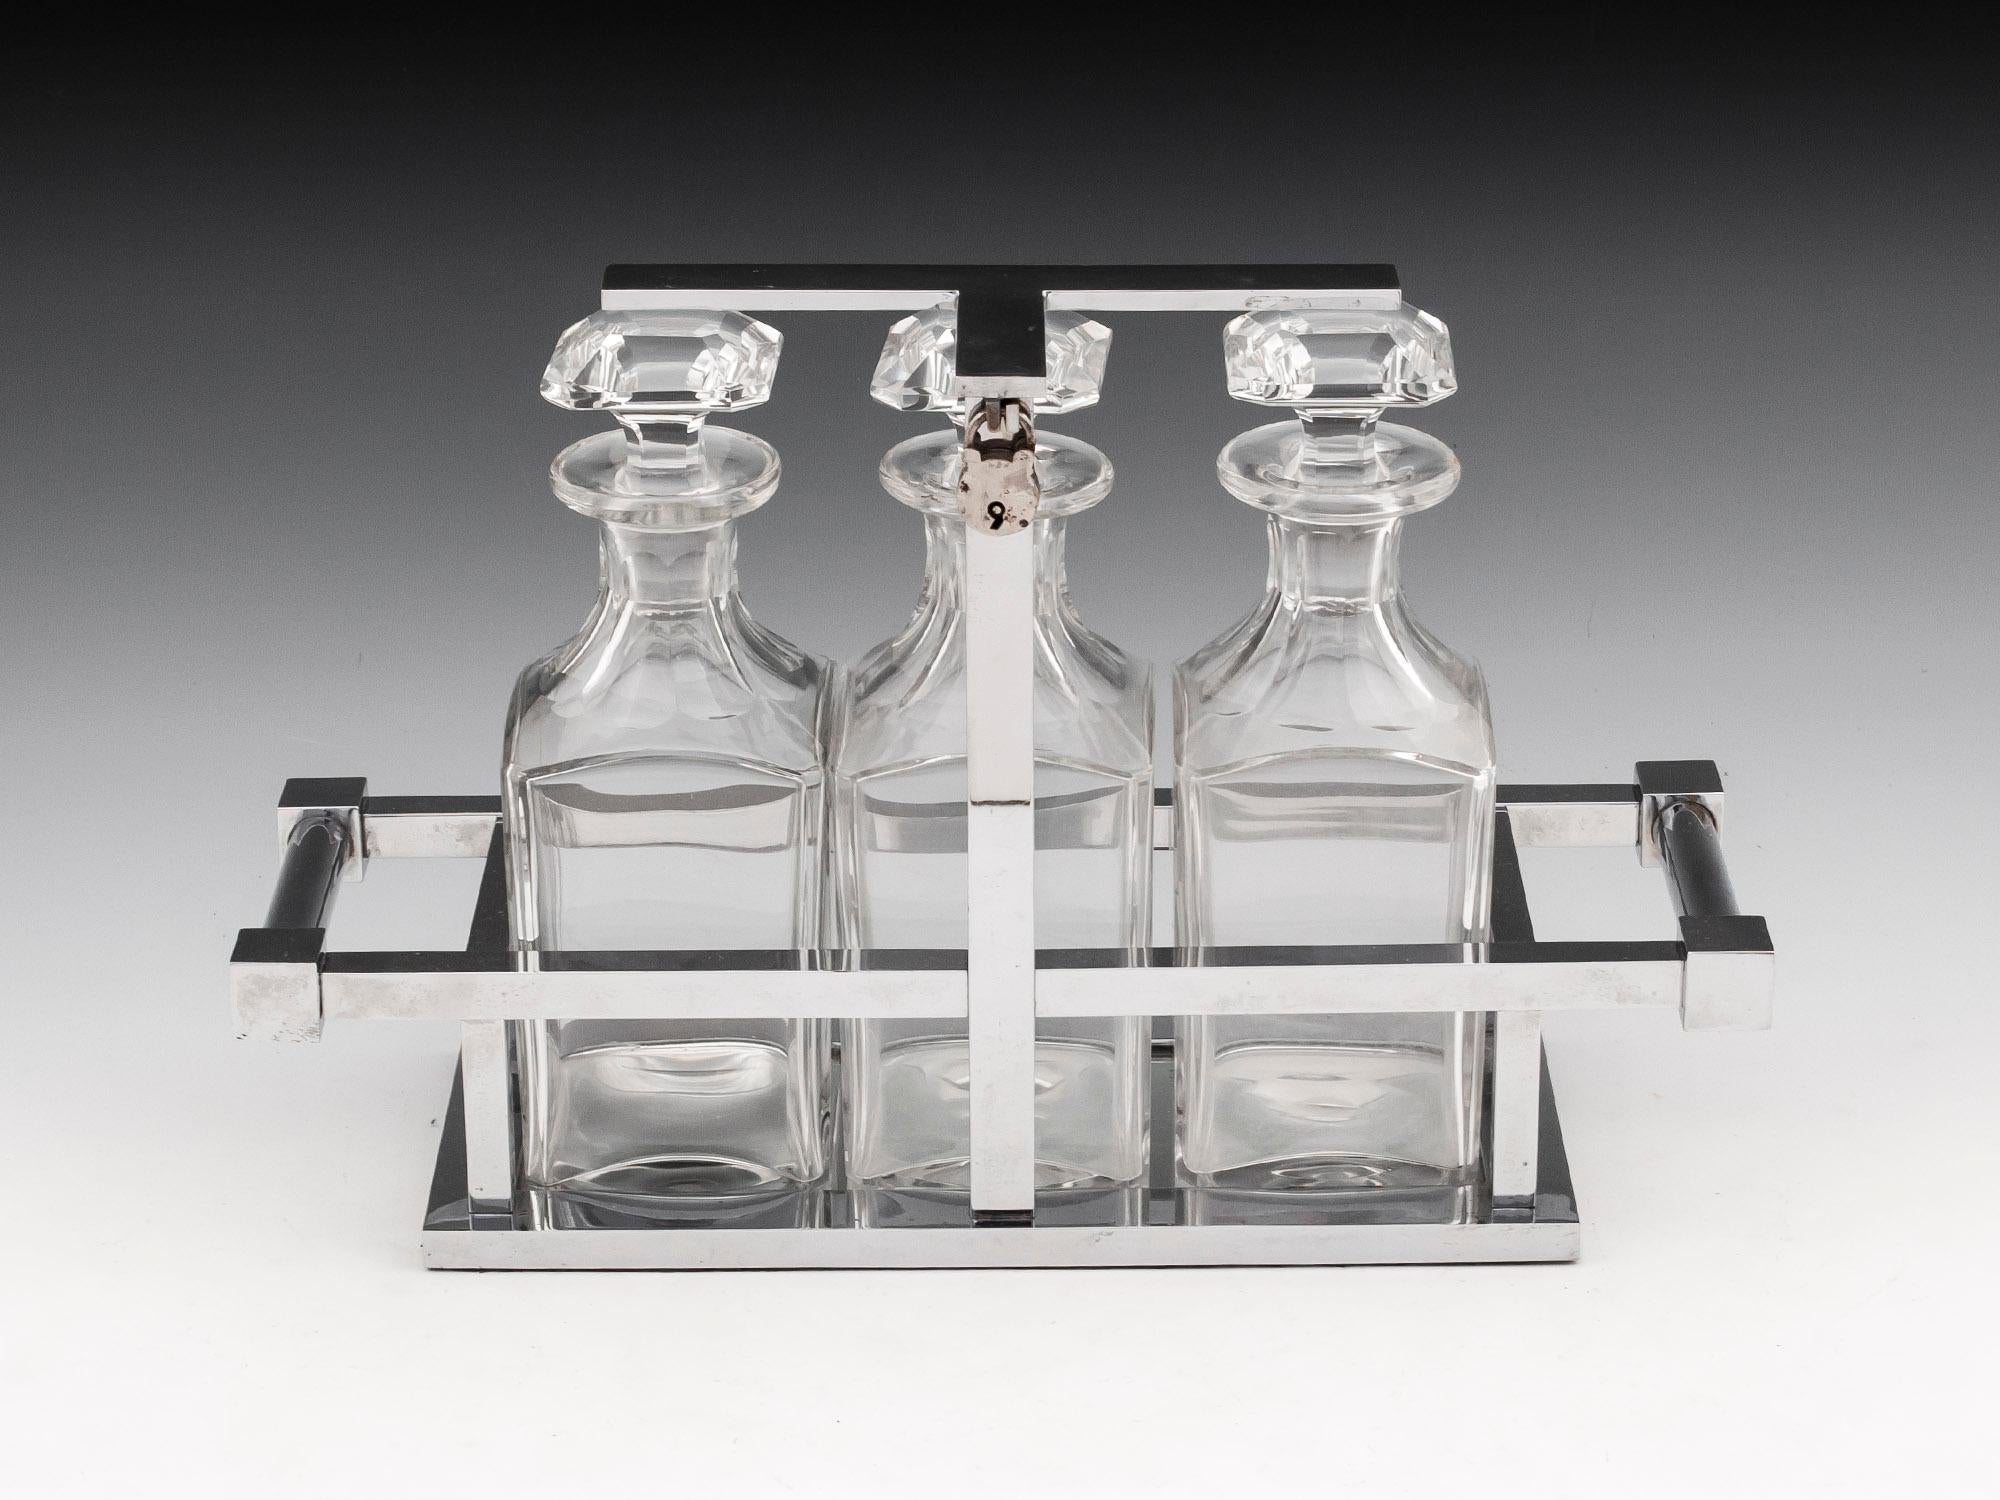 Chromium Plated Circa 1930

From our Tantalus collection, we are delighted to offer this Jacques Adnet Art Deco Tantalus. The Tantalus houses three square-cut crystal glass decanters with faceted stoppers within a Chromium plated tubular design with